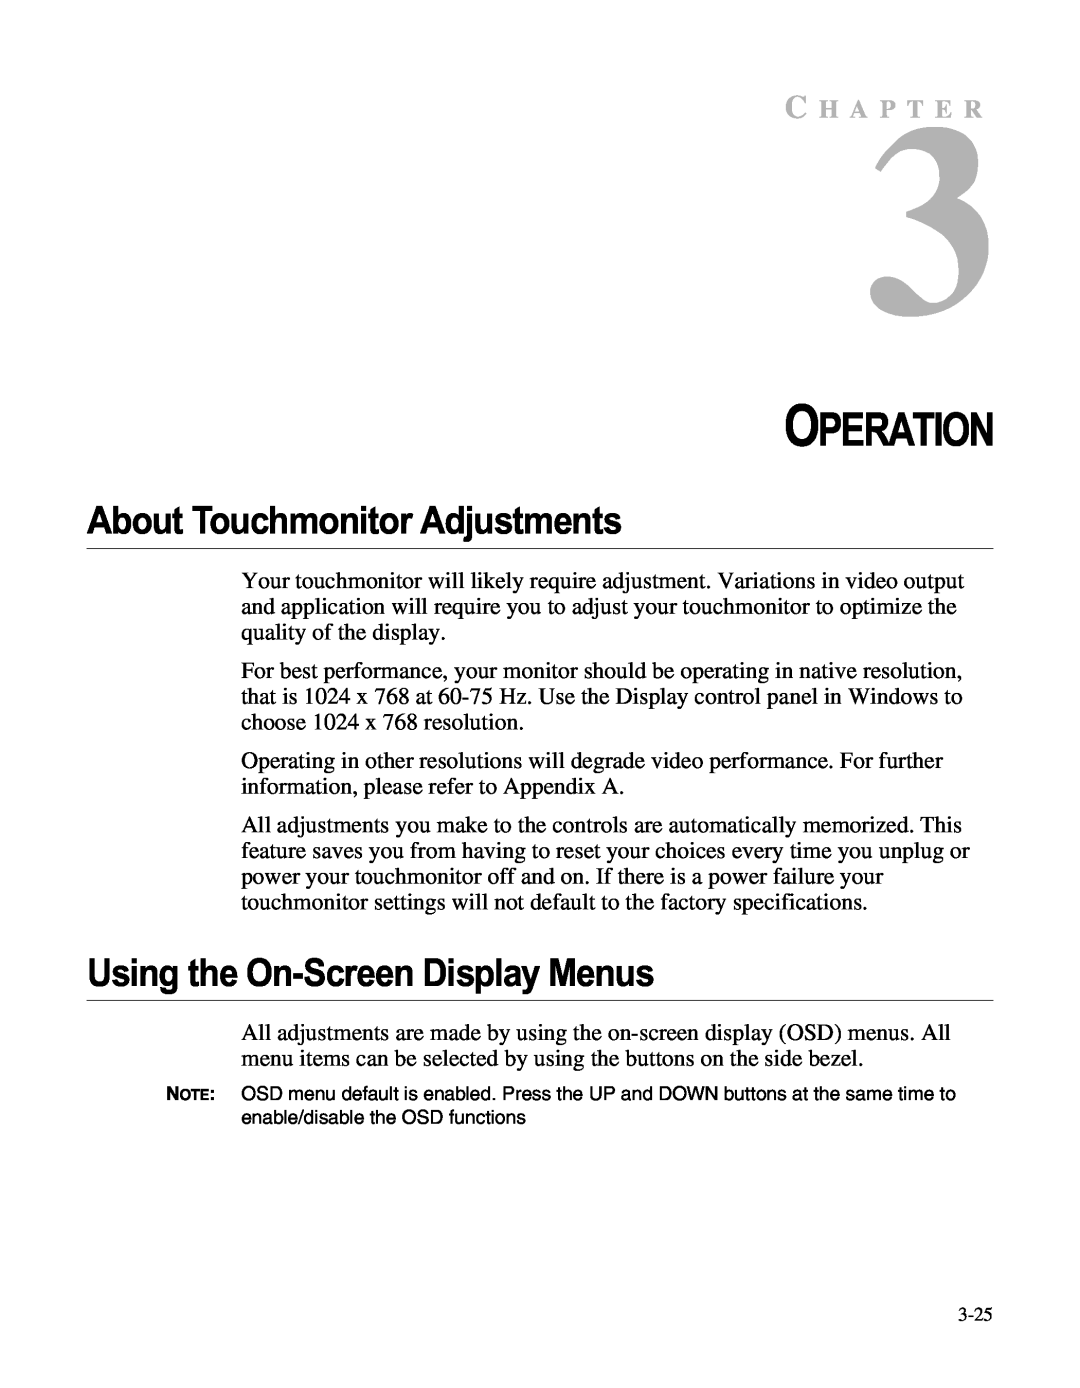 Elo TouchSystems LCD manual Operation, About Touchmonitor Adjustments, Using the On-Screen Display Menus, C H A P T E R 